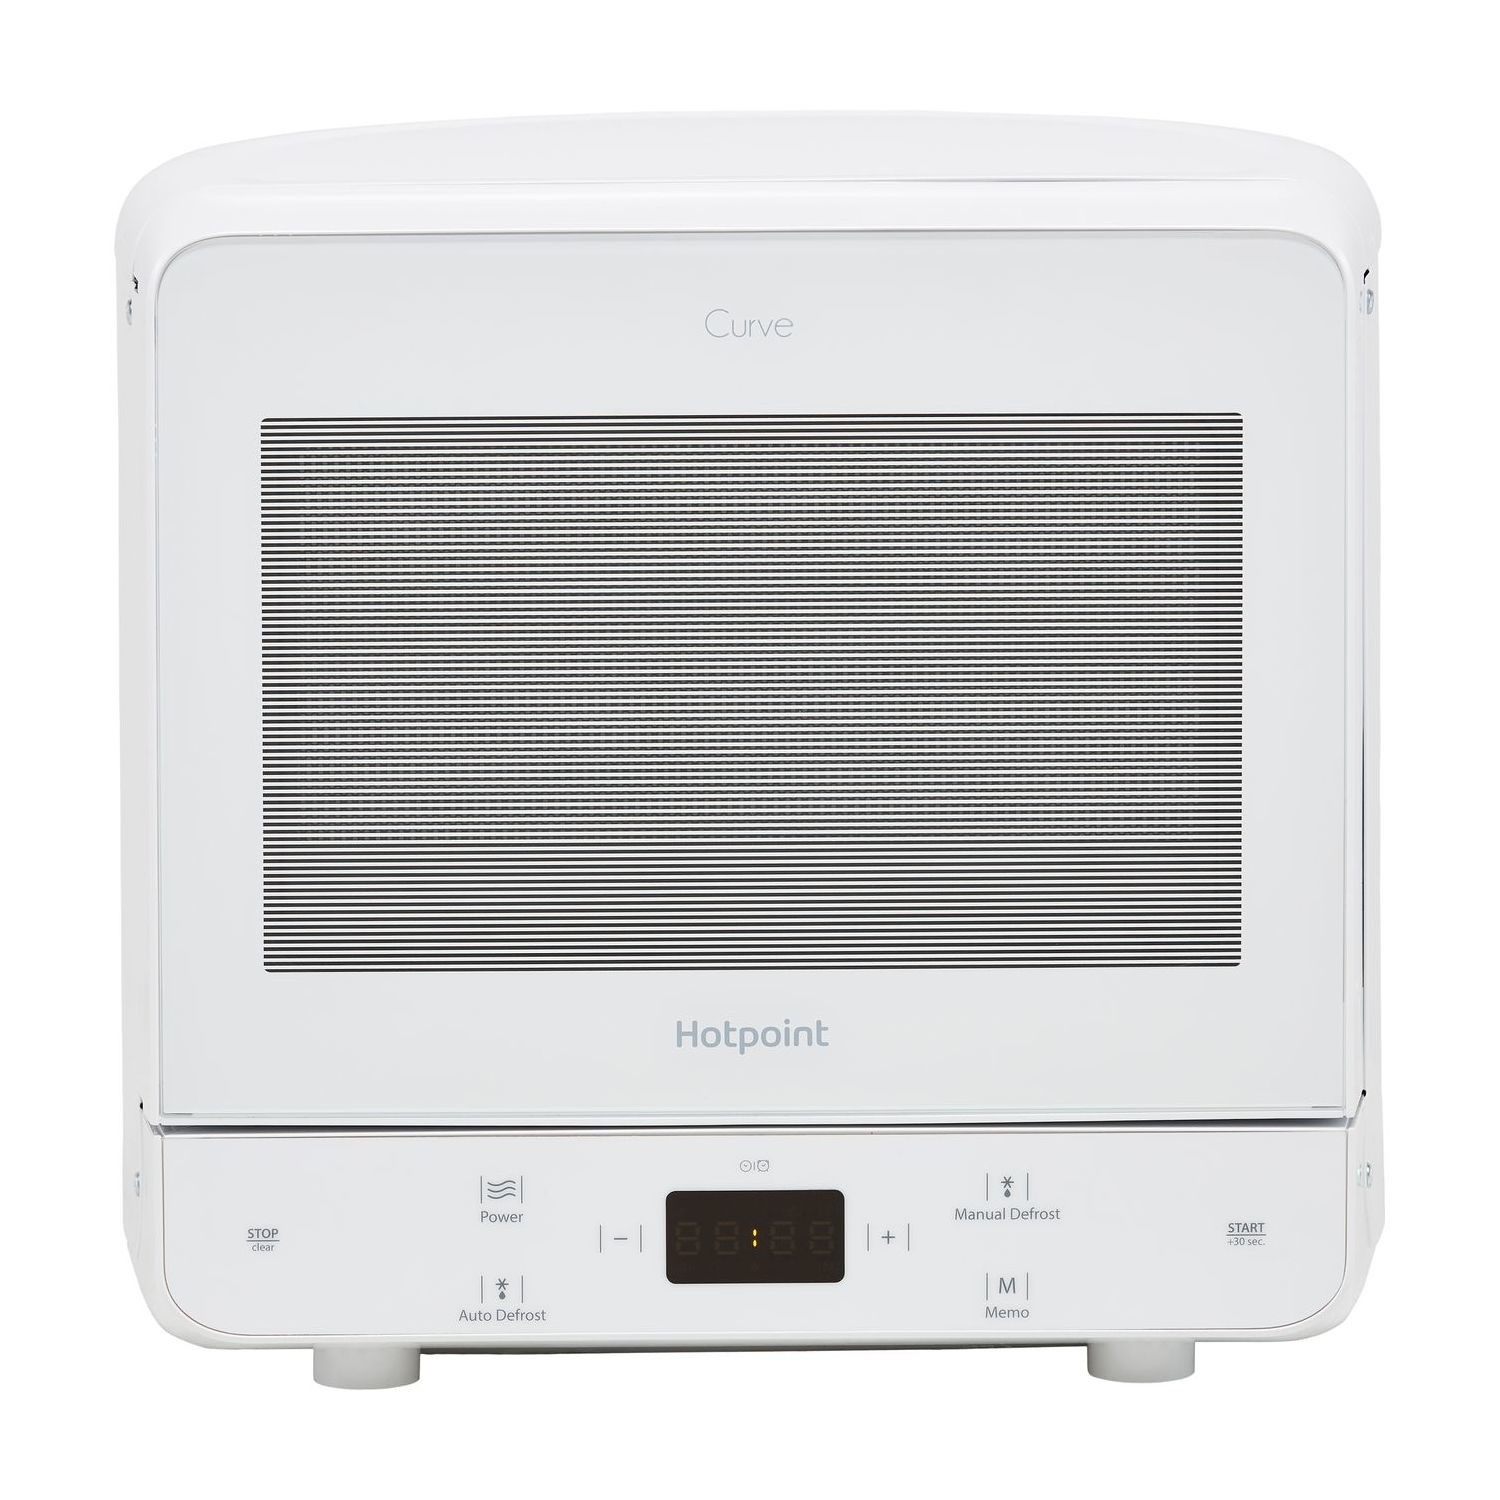 Refurbished Hotpoint Curve MWH1331FW 13L 700W Solo Microwave White